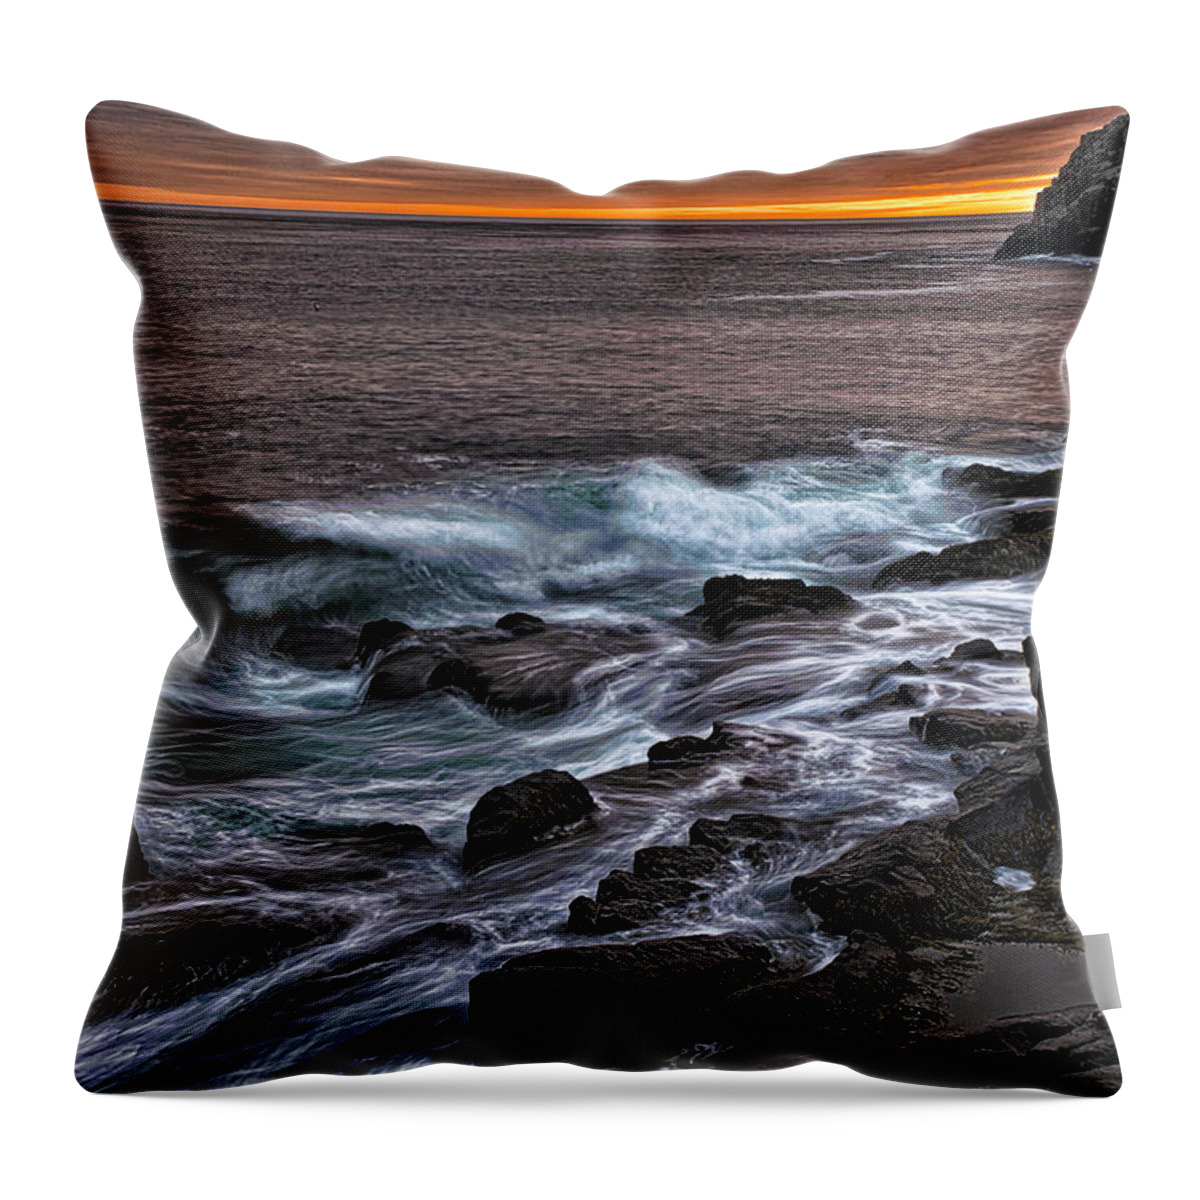 Sunset At Gullivers Hole Throw Pillow featuring the photograph Sunset at Gullivers Hole by Marty Saccone